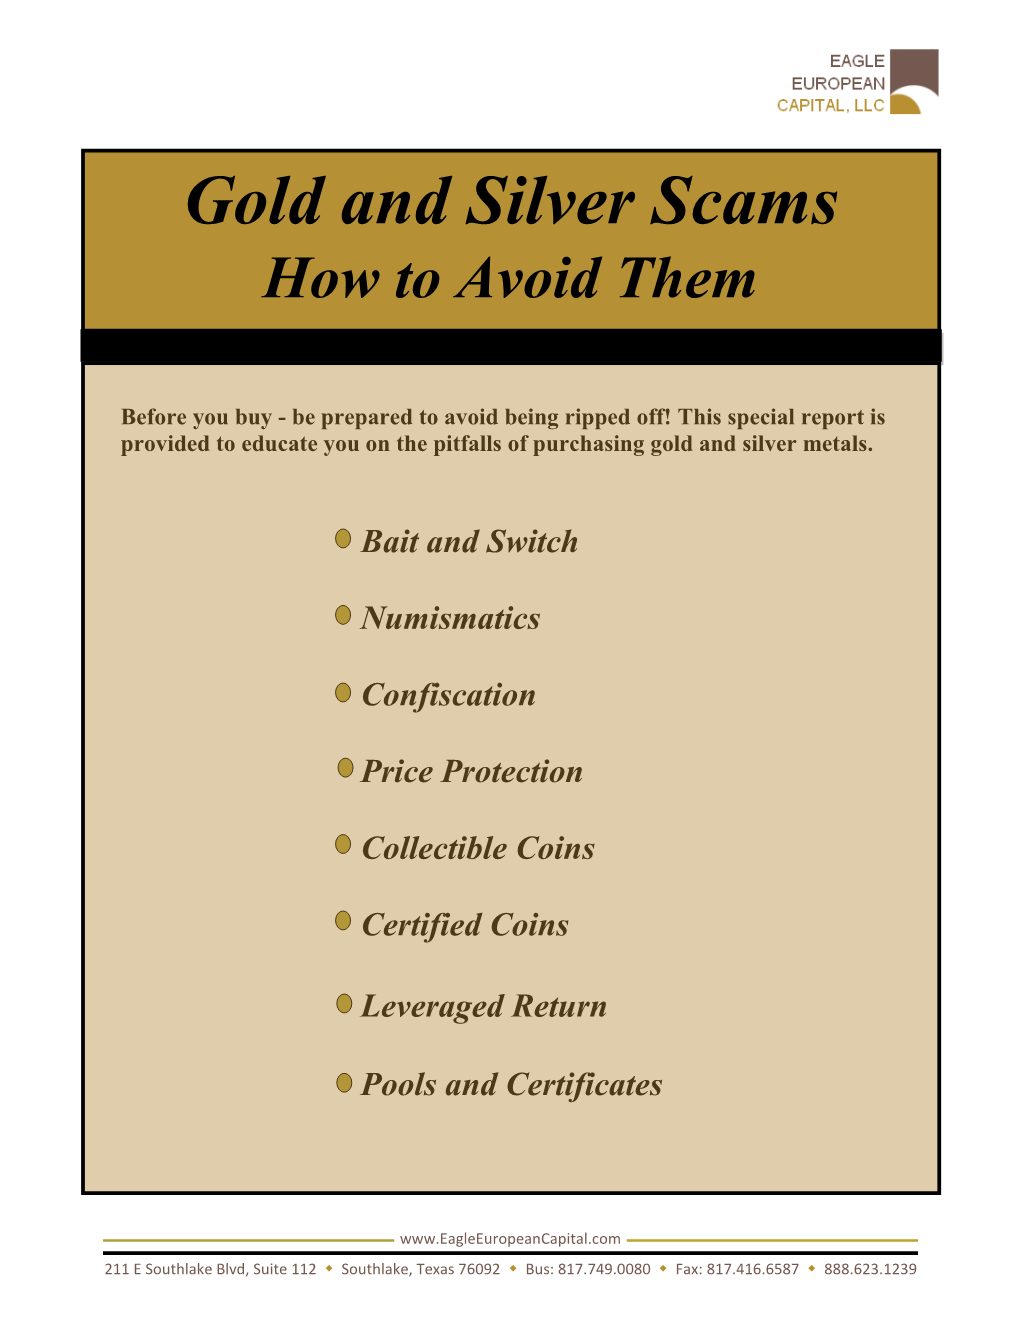 Gold and Silver Scams How to Avoid Them